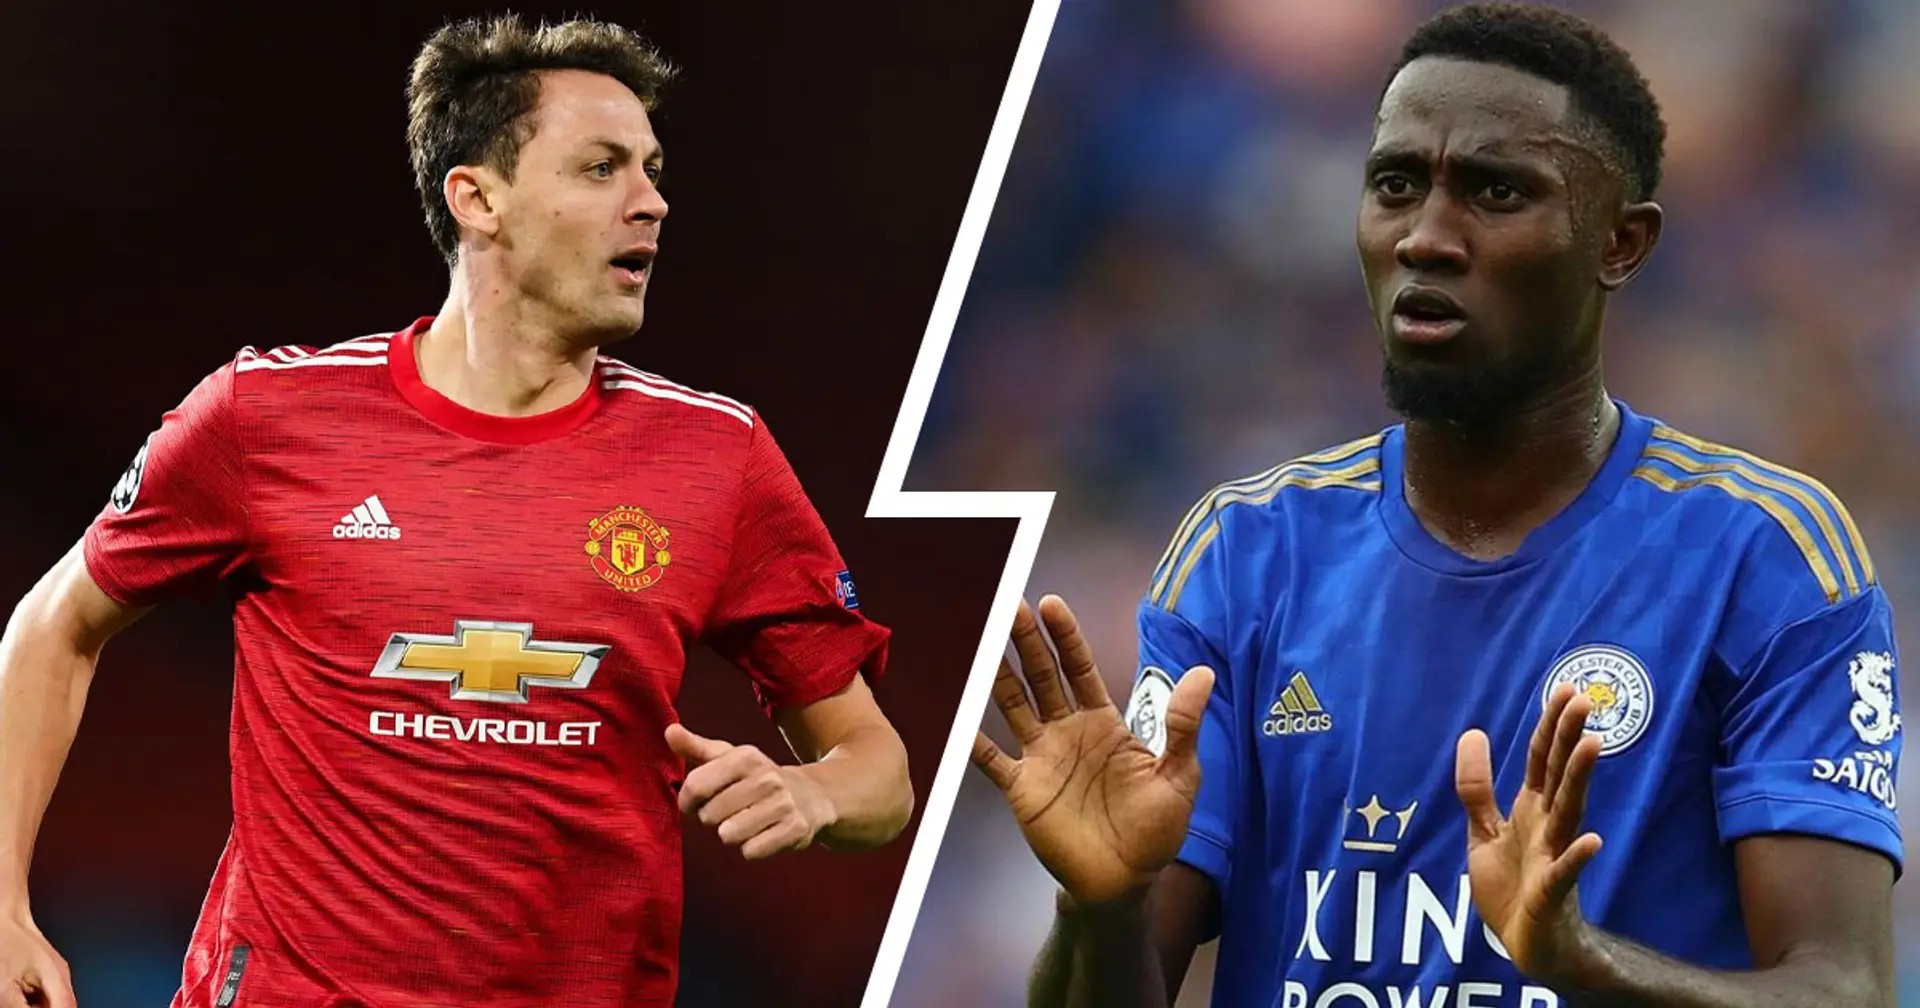 N’Didi, Bennacer & more: United fans debate possible replacement to succeed Matic